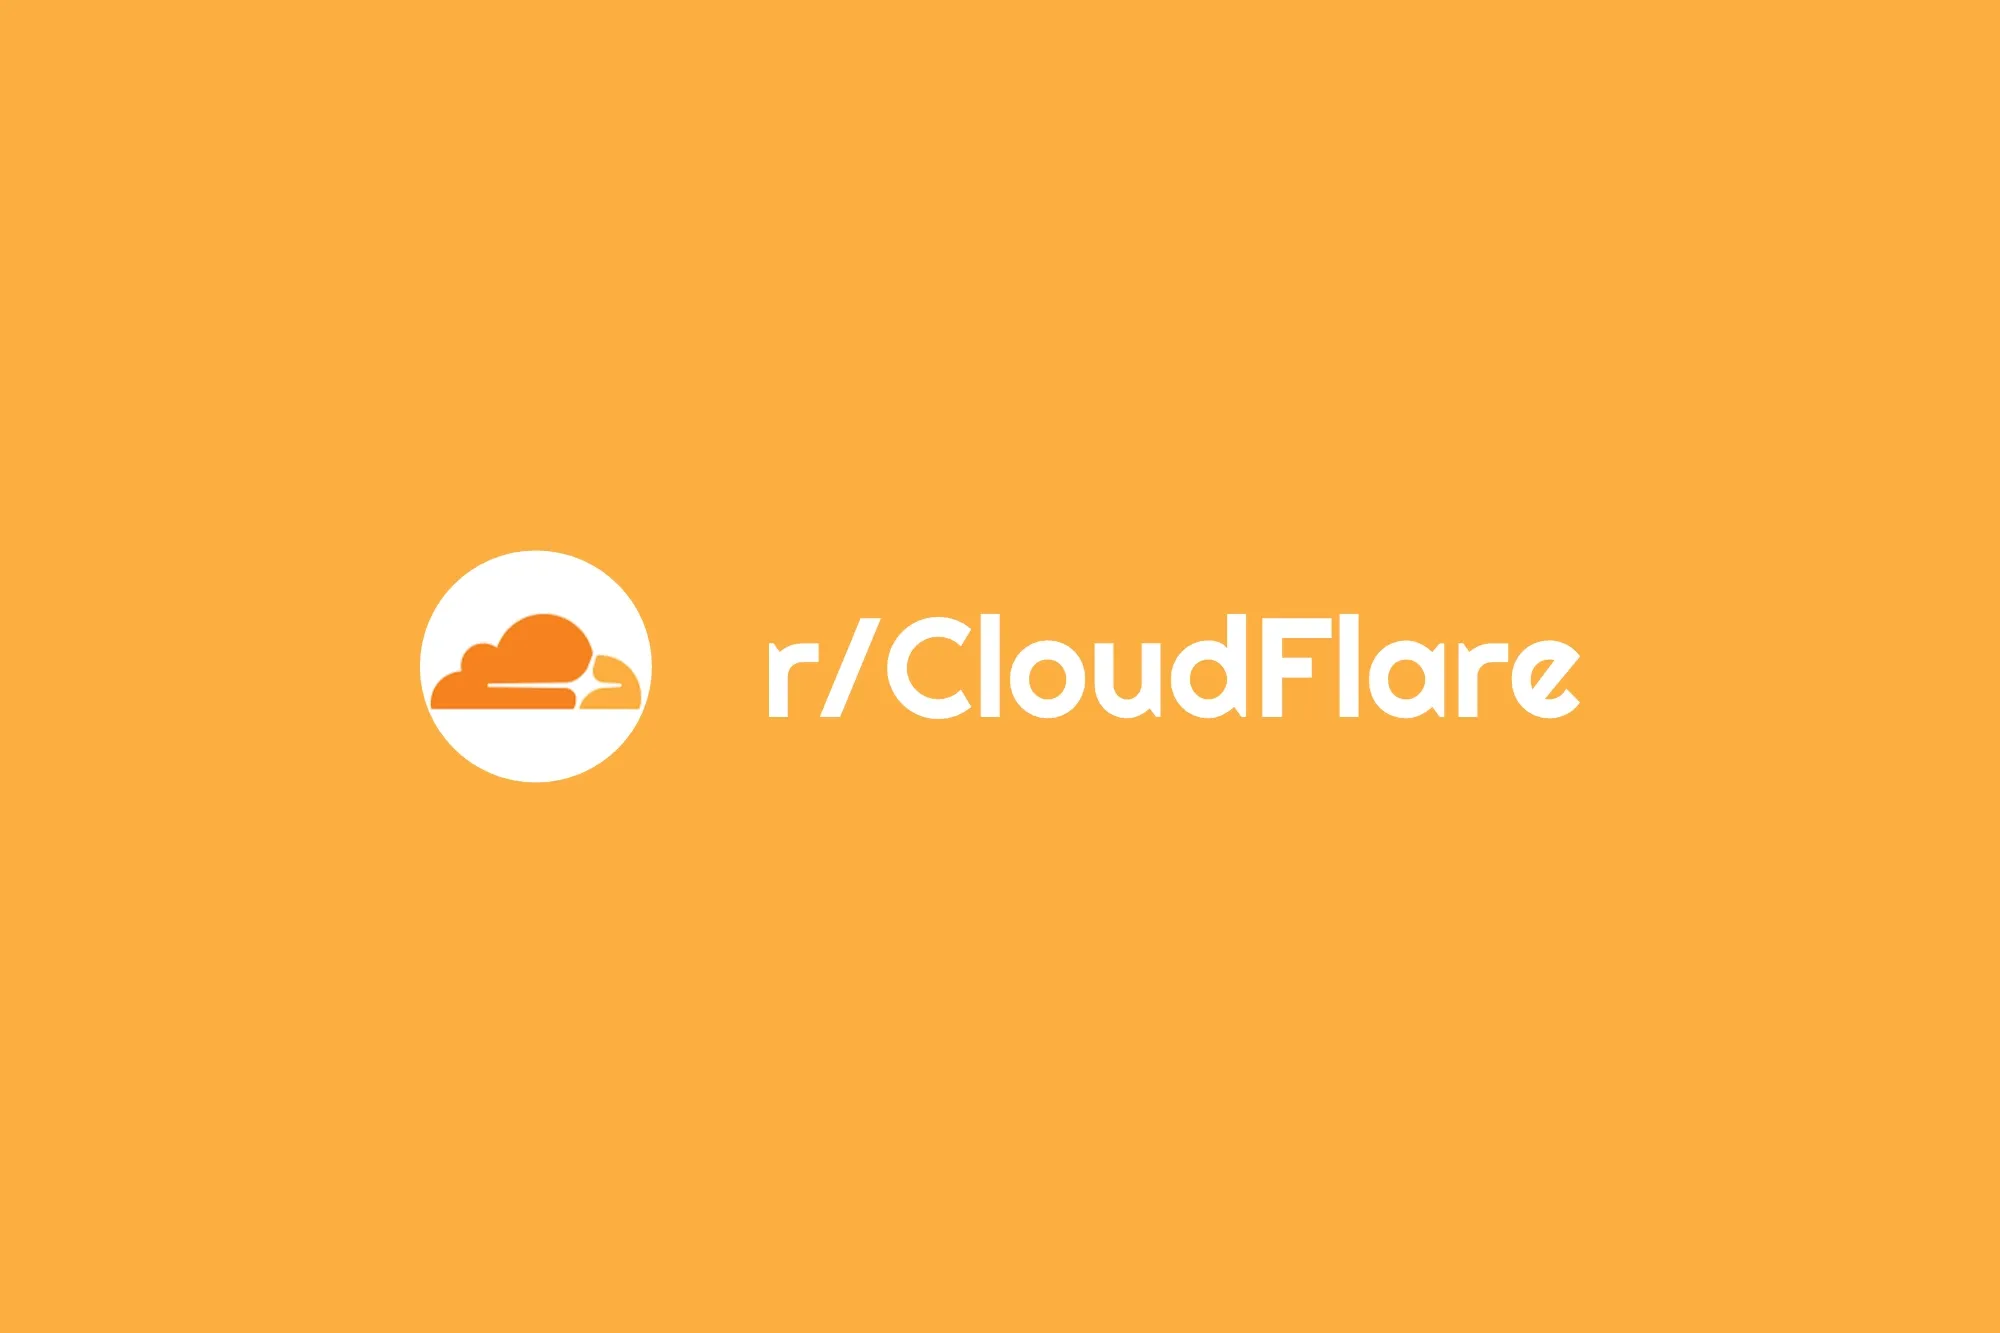 r/CloudFlare: I have 3 remote servers can I use tunnels to connect them to each other so I can call internal ips from each other?